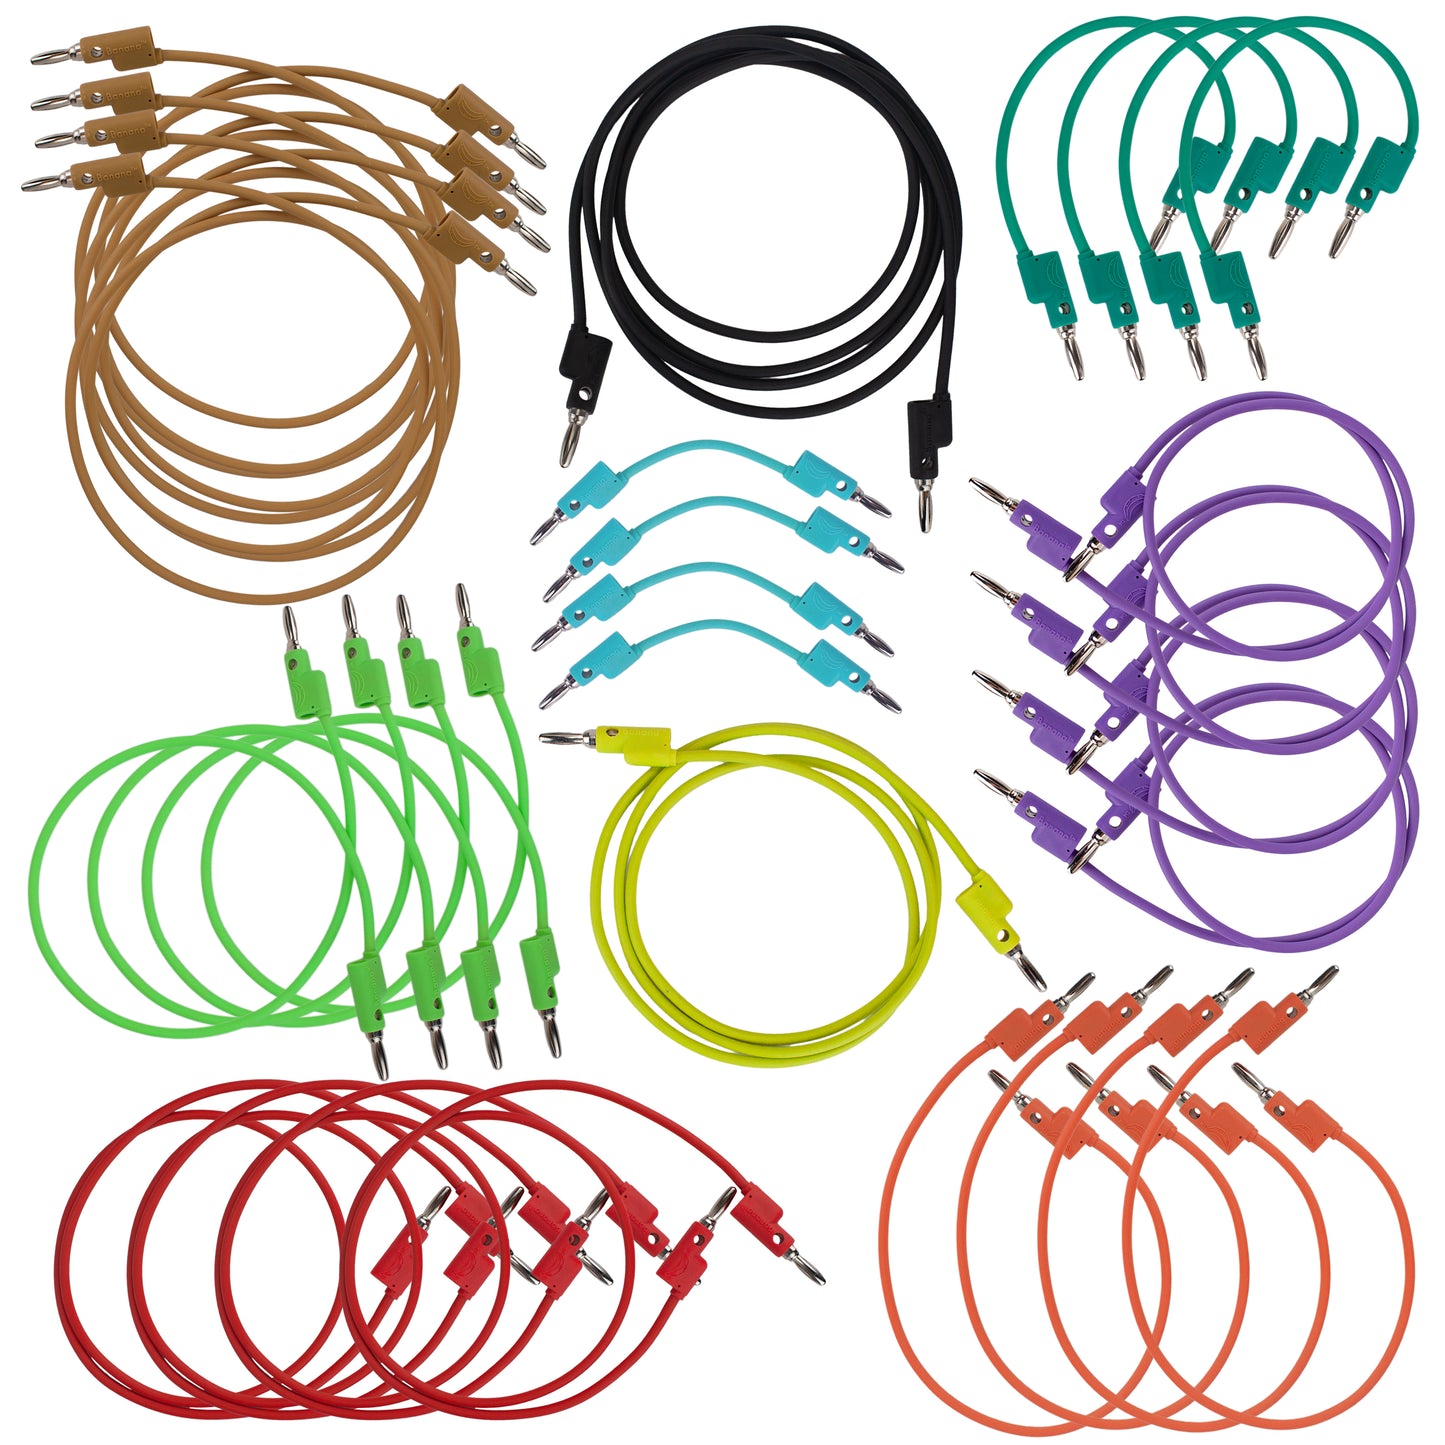 Banana ™ Patch Cables 30 Pack